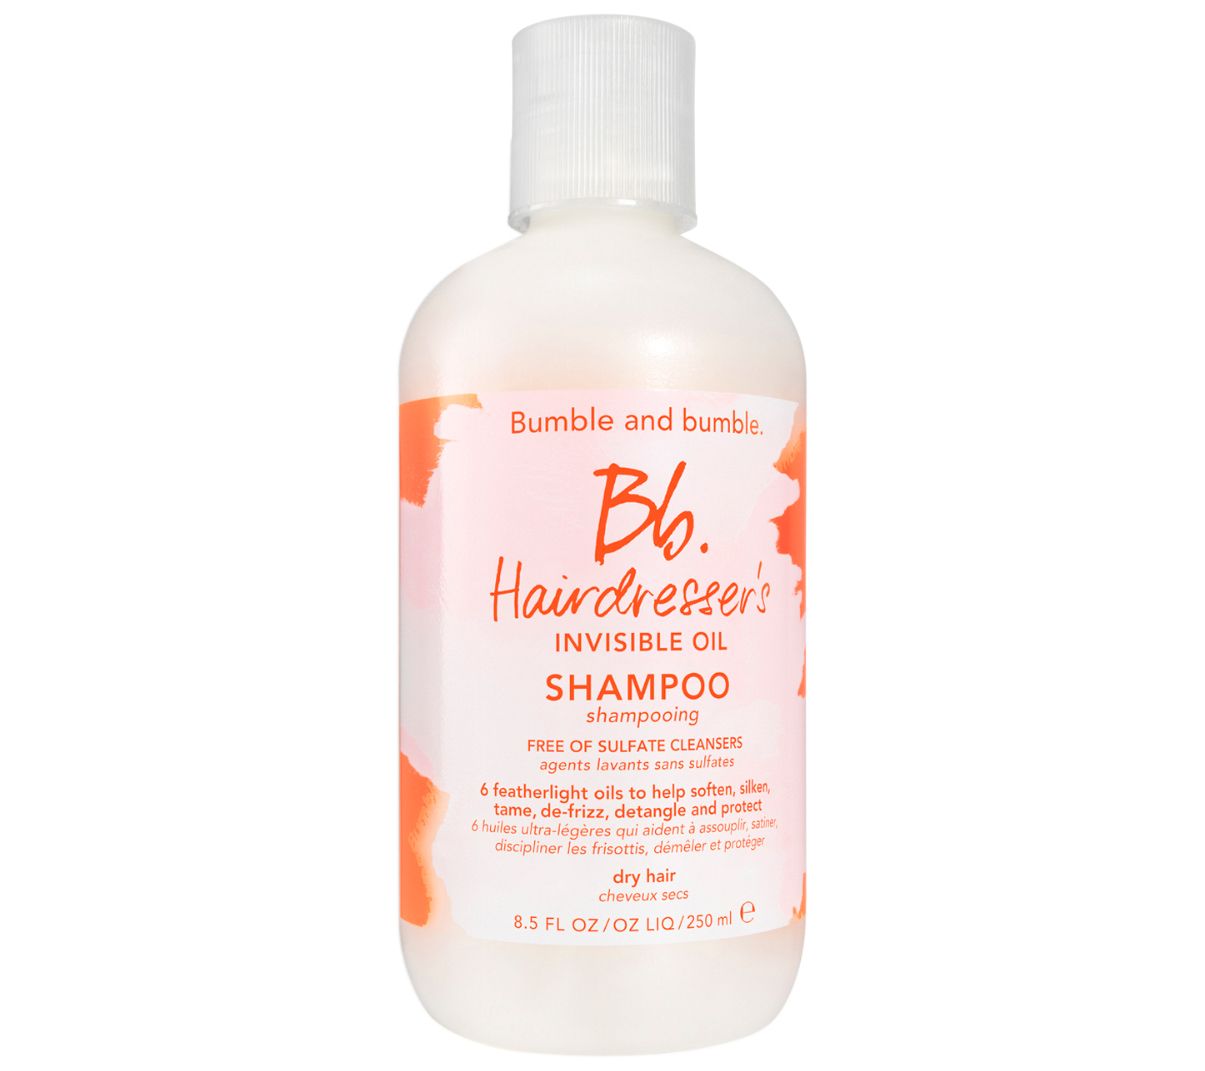 and bumble. Hairdresser's Invisible OilShampoo 8.5oz -